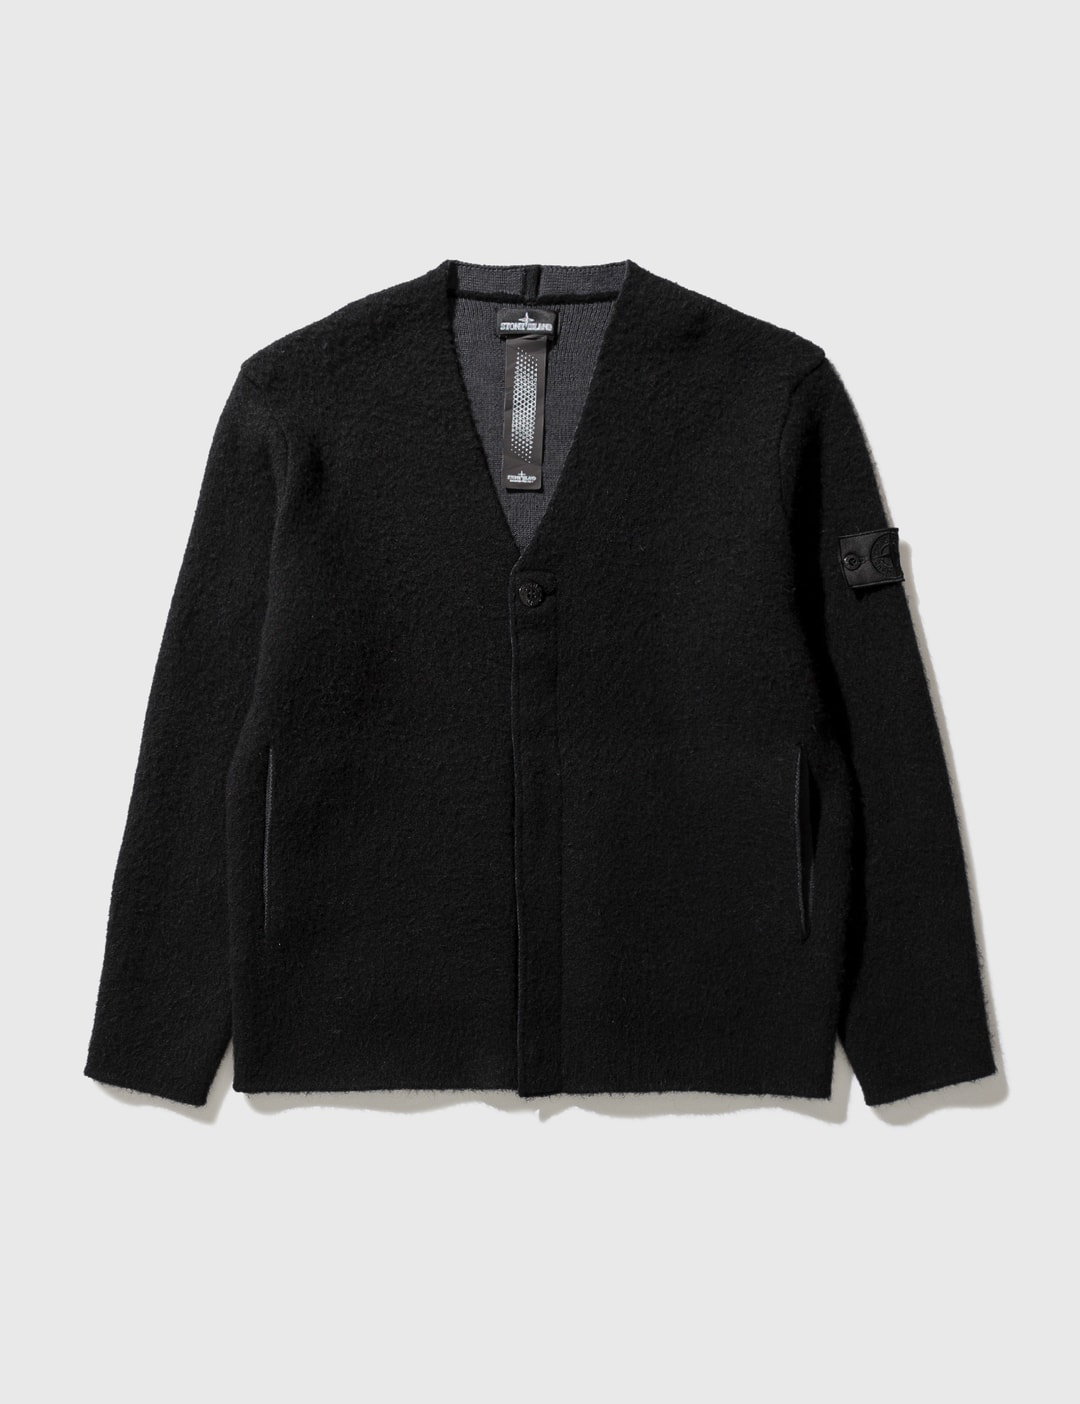 ethiek Rechtmatig grond Stone Island Shadow Project - Knit Jacket | HBX - Globally Curated Fashion  and Lifestyle by Hypebeast